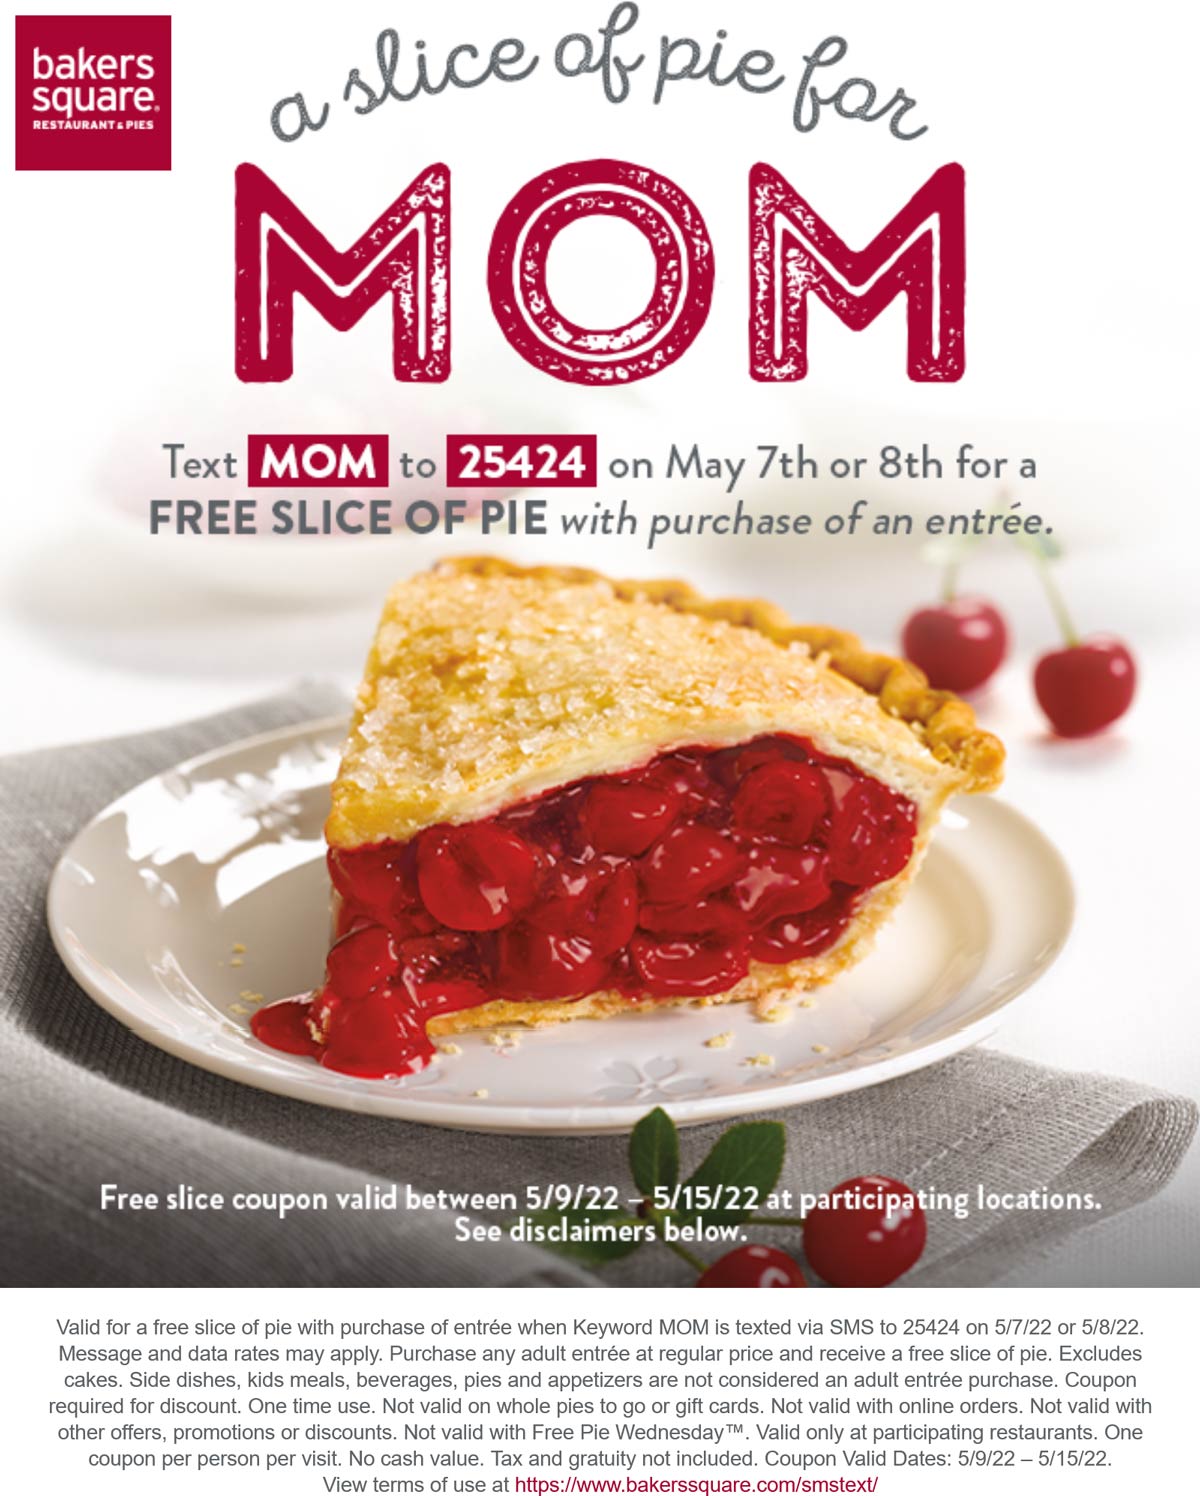 Bakers Square restaurants Coupon  Free slice of pie for mom via text at Bakers Square #bakerssquare 